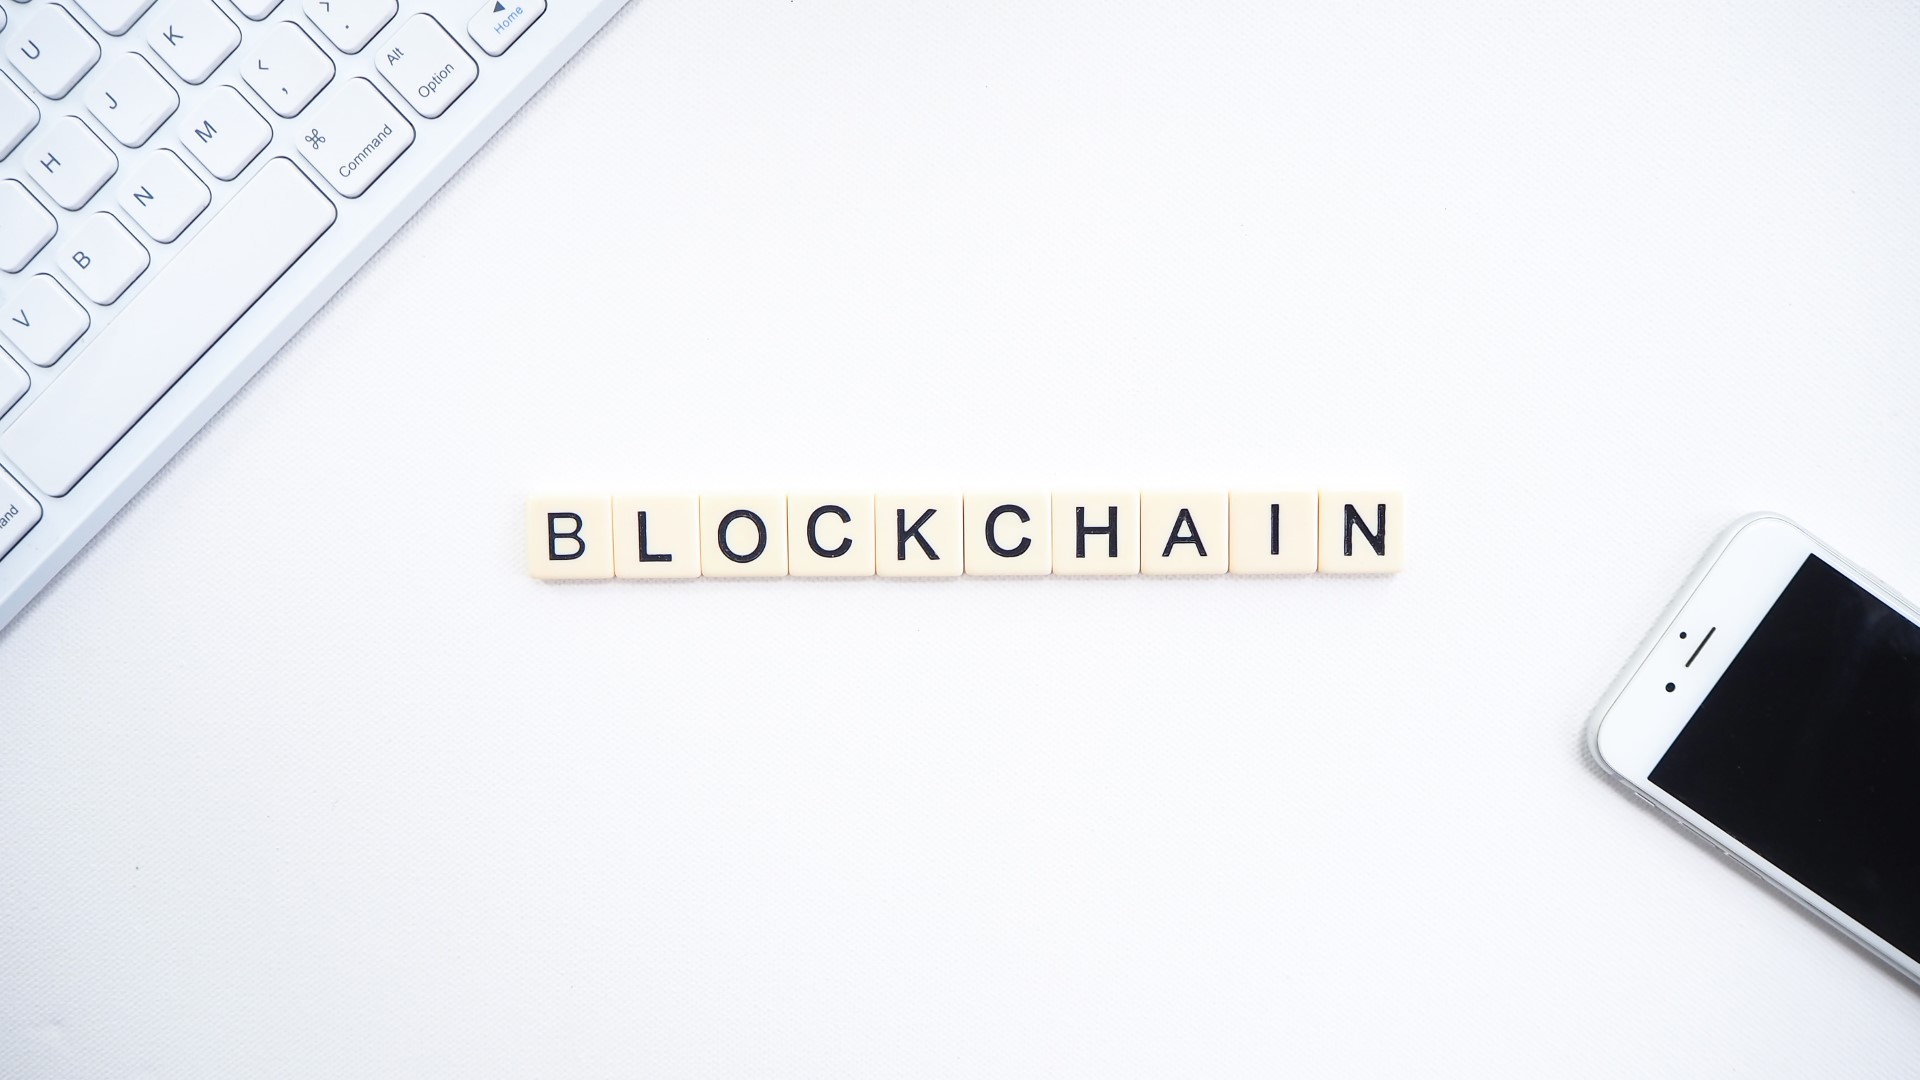 <p>This post discusses new Blockchain feeder funds being launched in India and whether investors should invest in such funds.</p>

